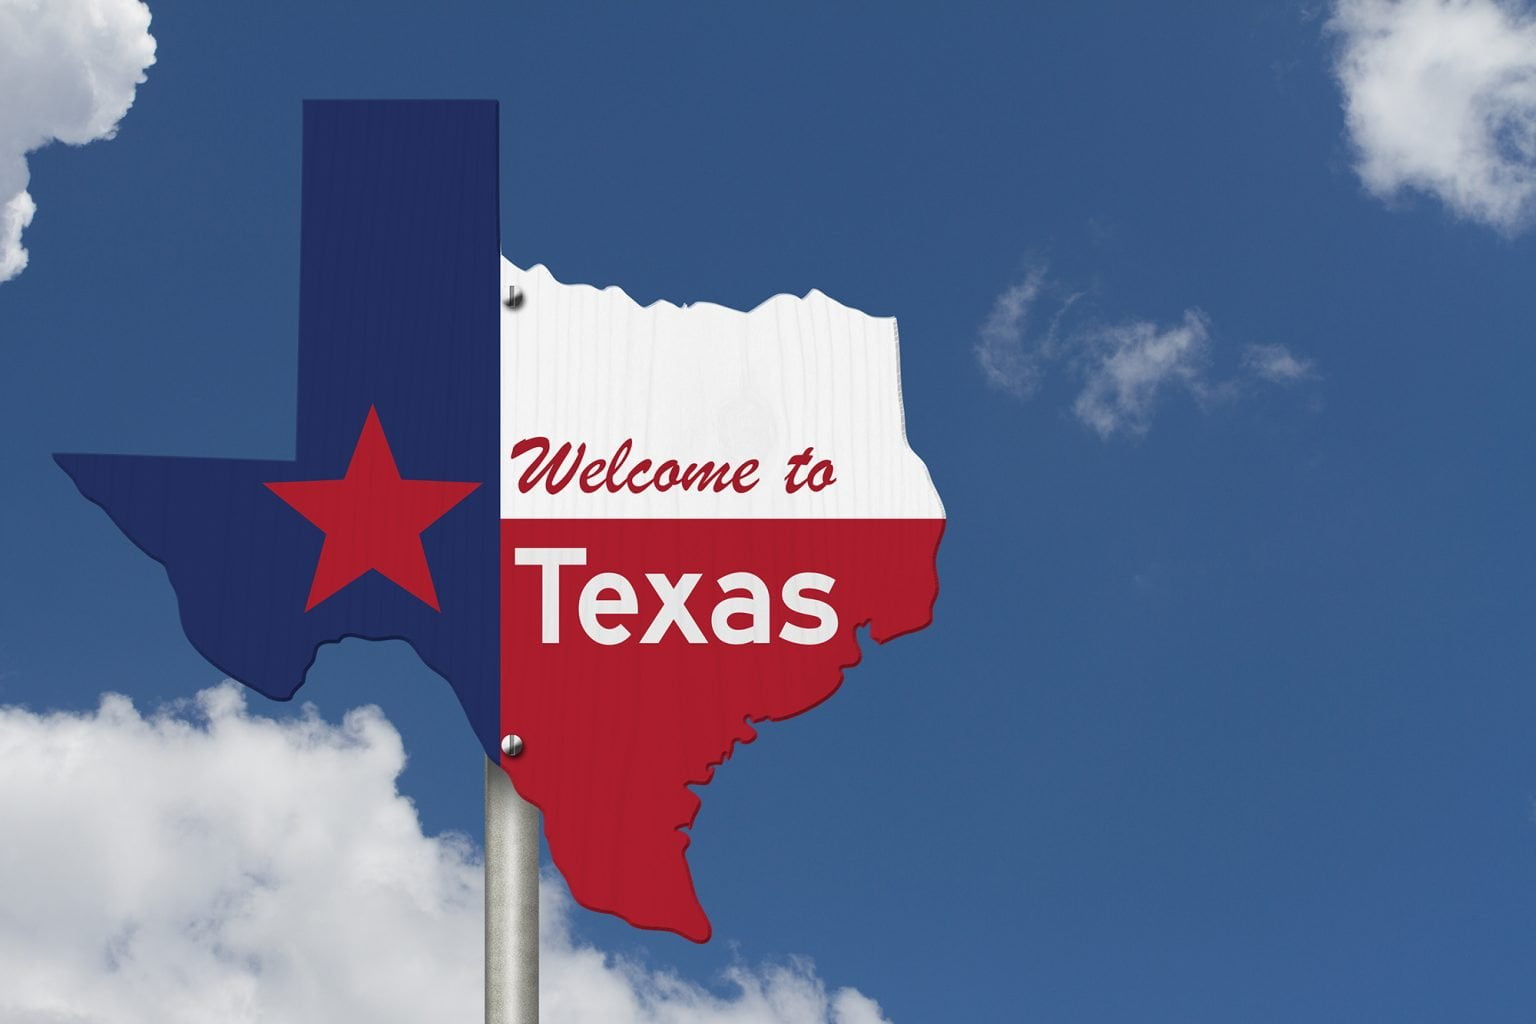 Welcome to the state of Texas road sign in the shape of the state map with the flag